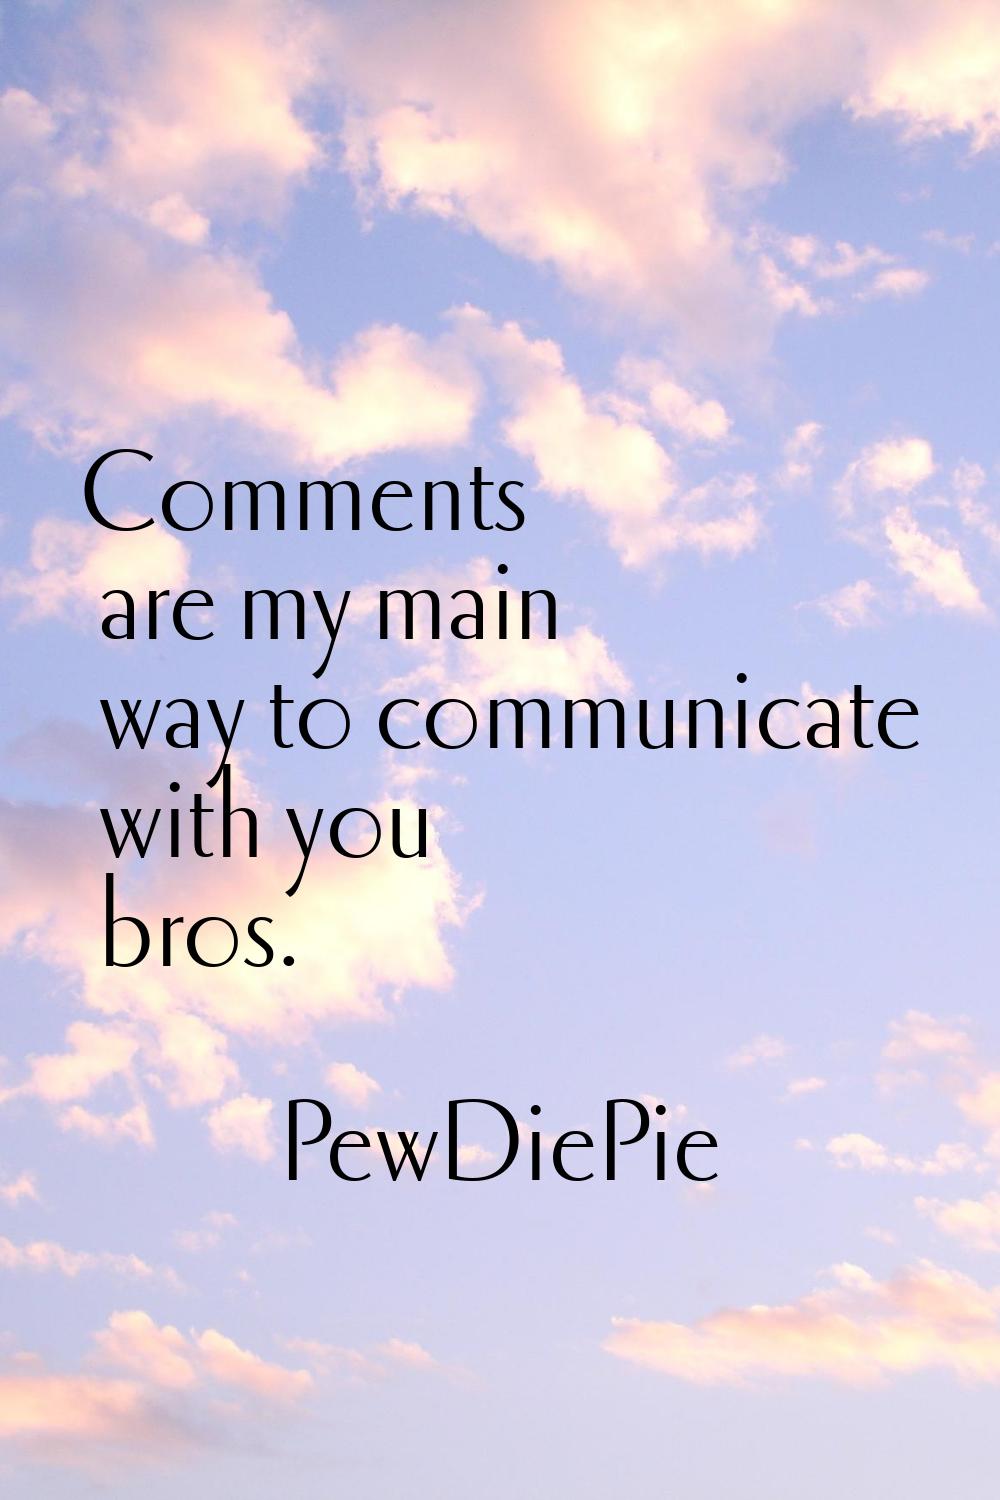 Comments are my main way to communicate with you bros.